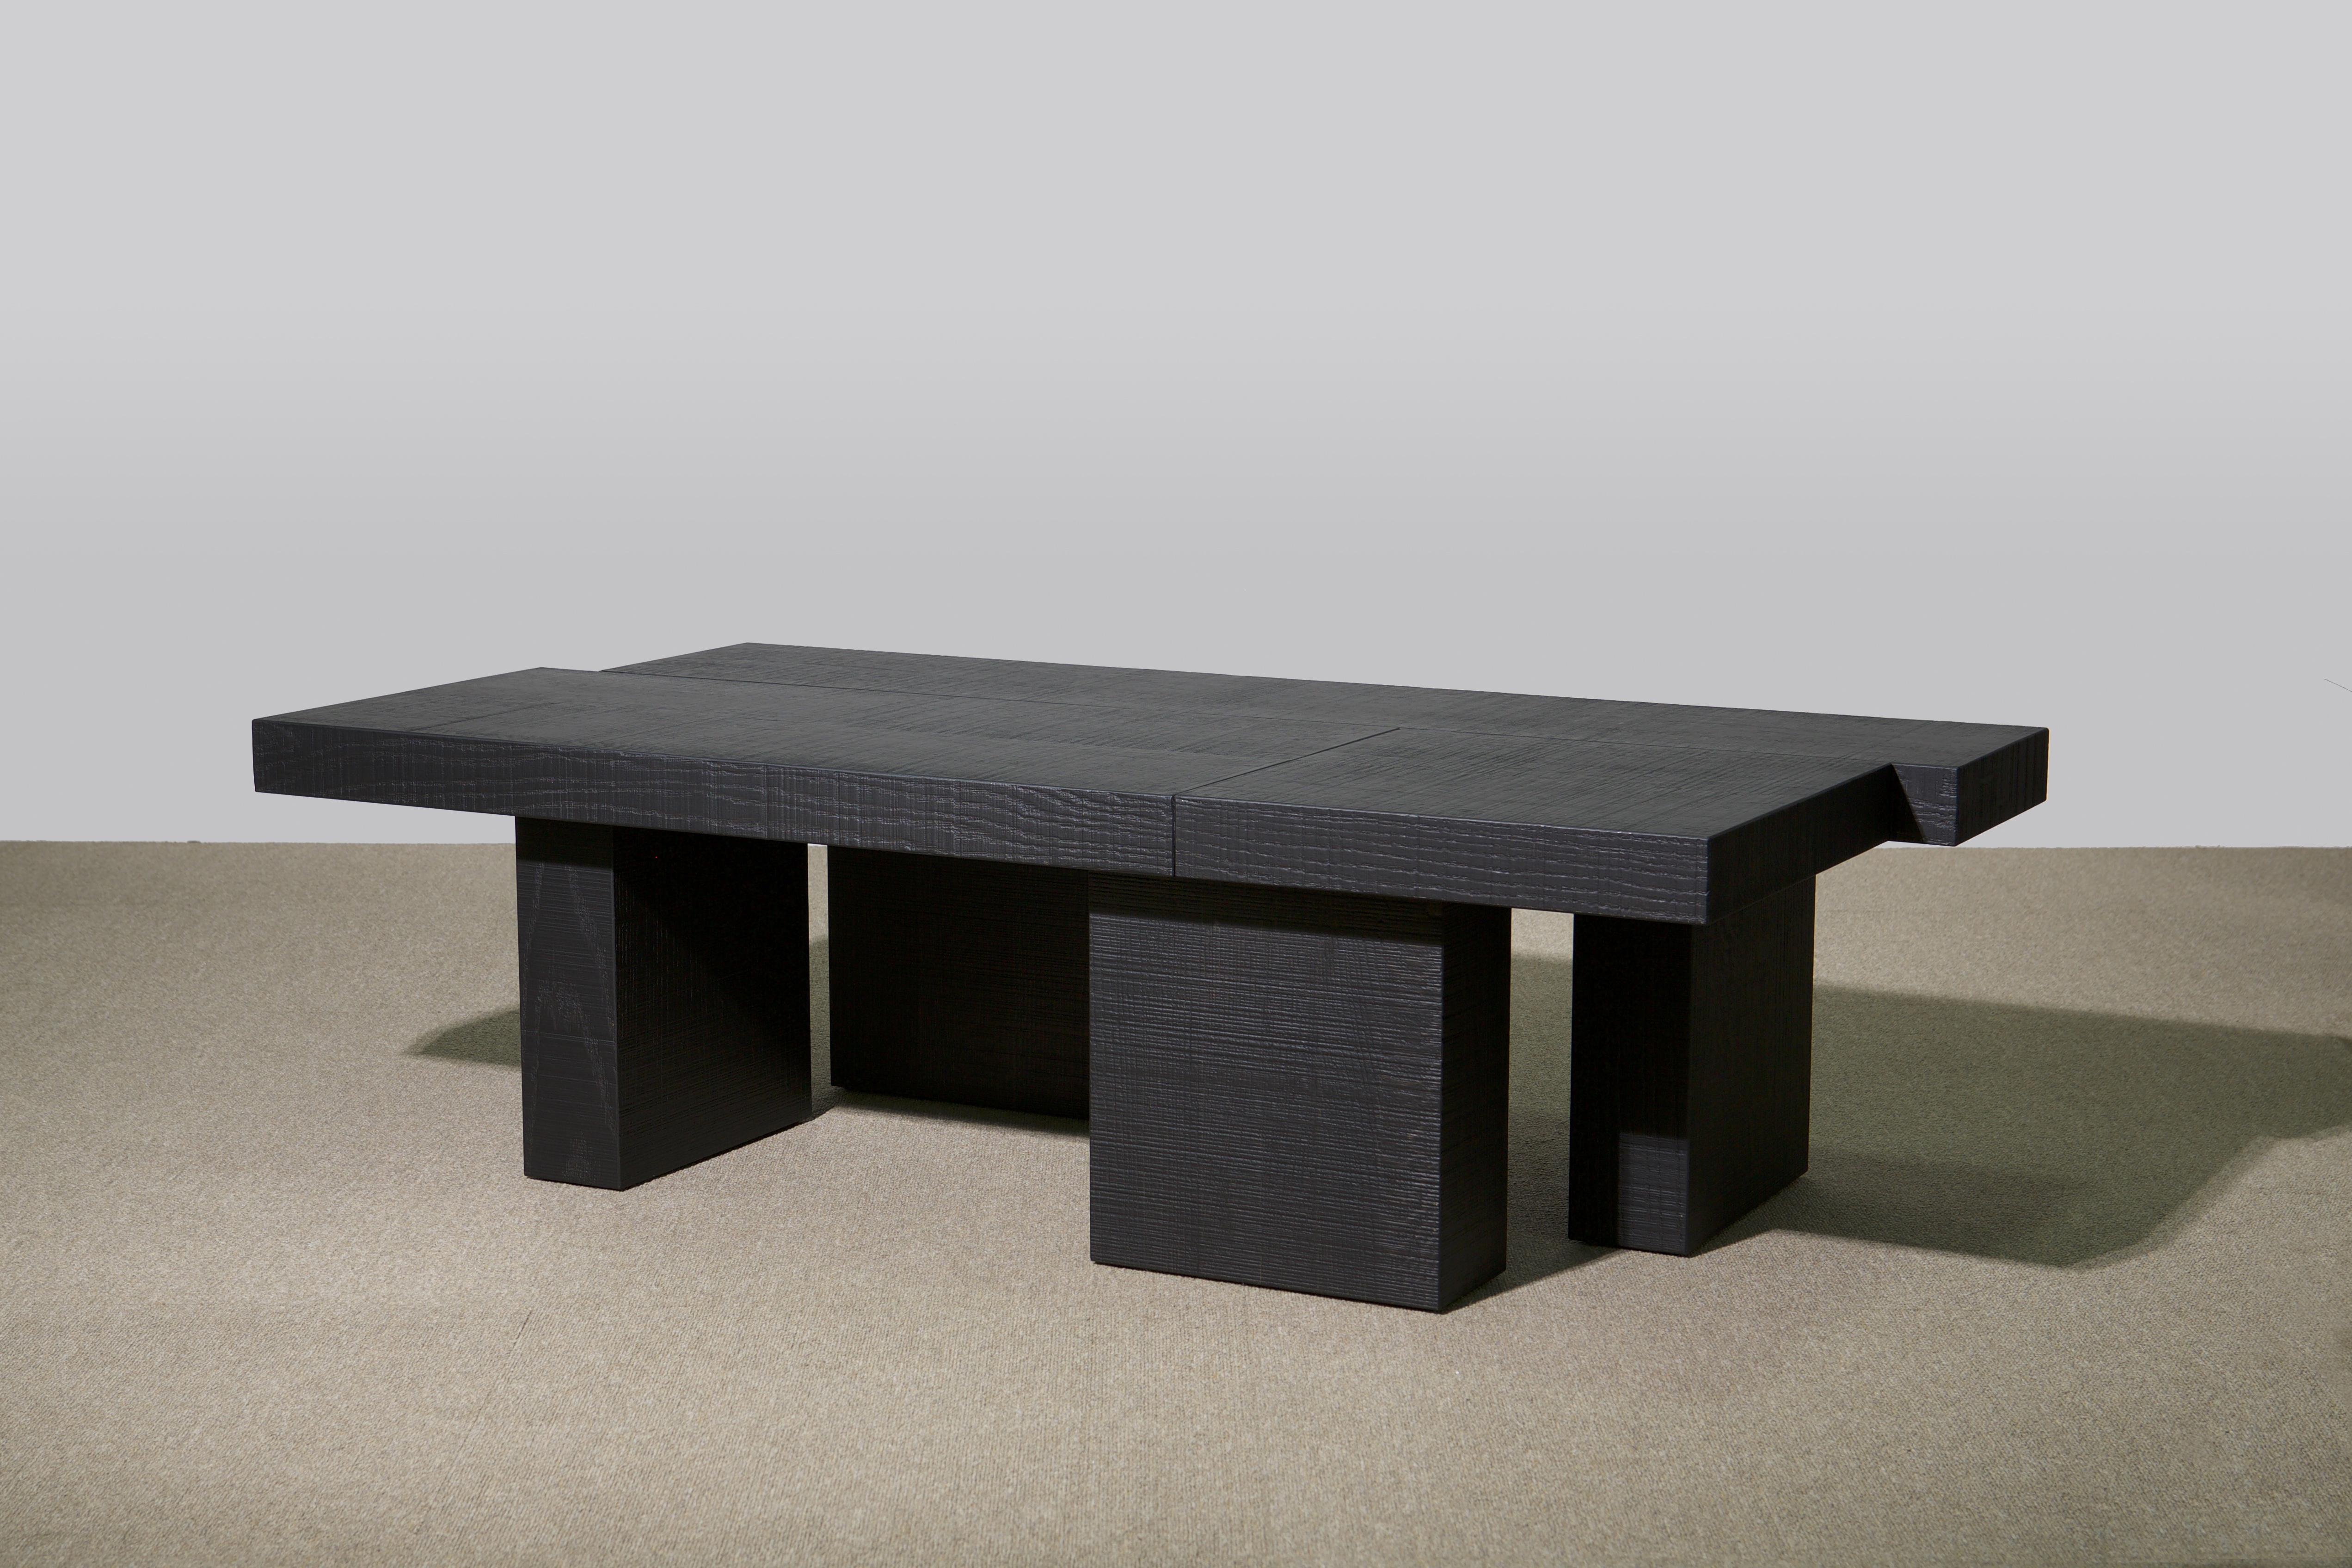 Black Layered oak wood bench by Hyungshin Hwang.
Dimensions: D 120 x W 72 x H 39 cm.
Materials: ebonized red oak.

Layered Series is the main theme and concept of work of Hwang, who continues his experiment which is based on architectural